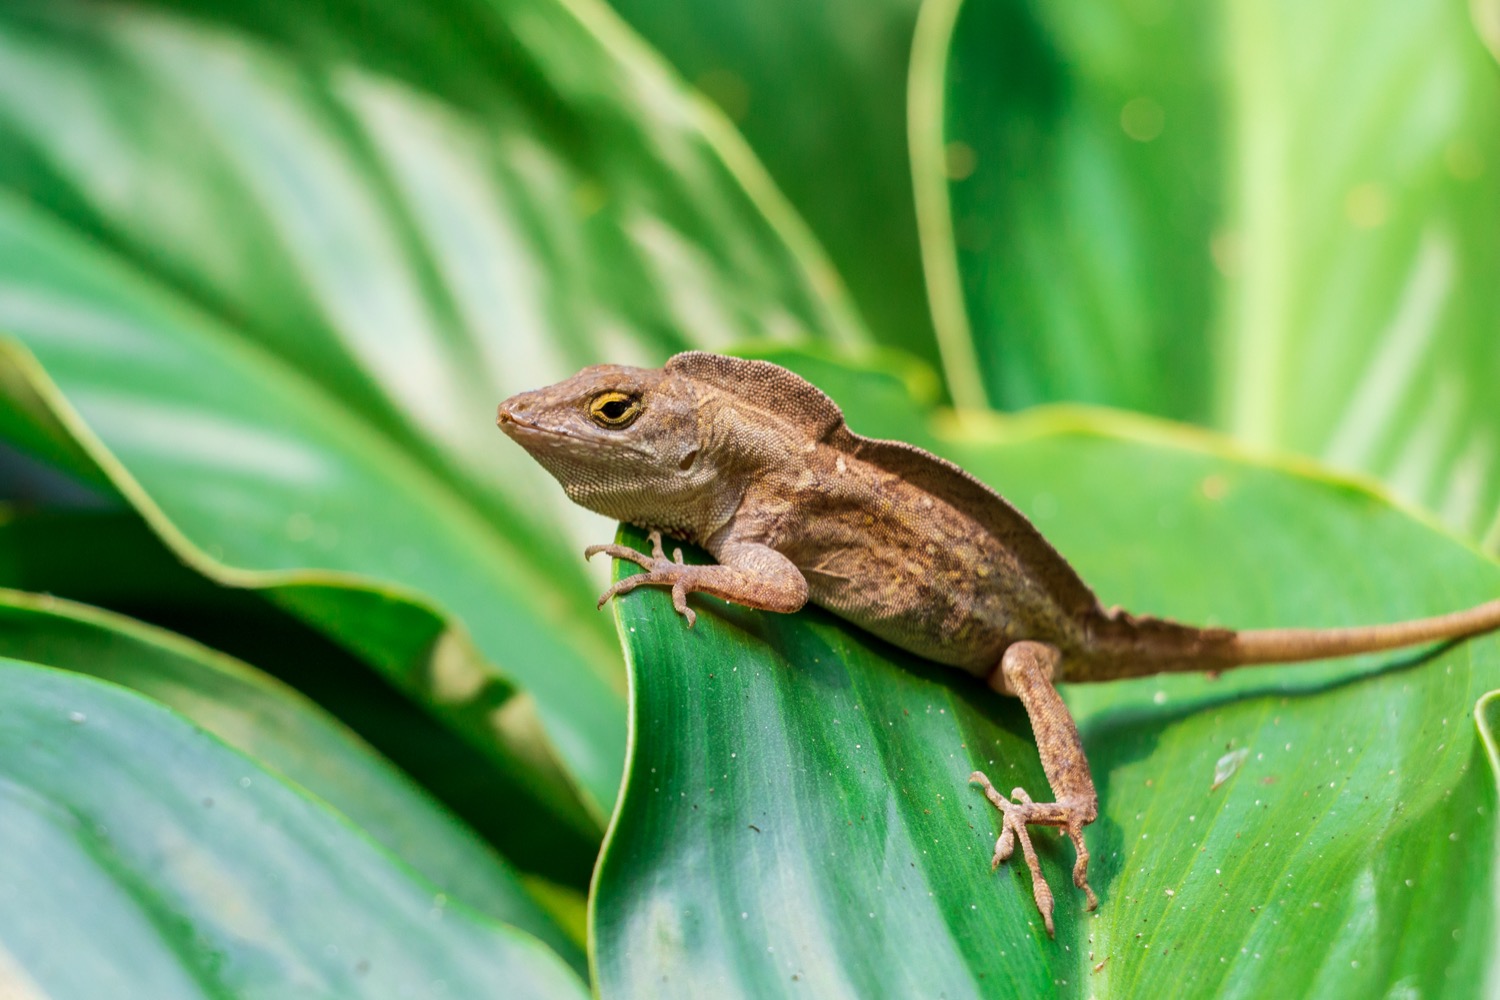 a small brown lizard perched on the edge of a large leaf